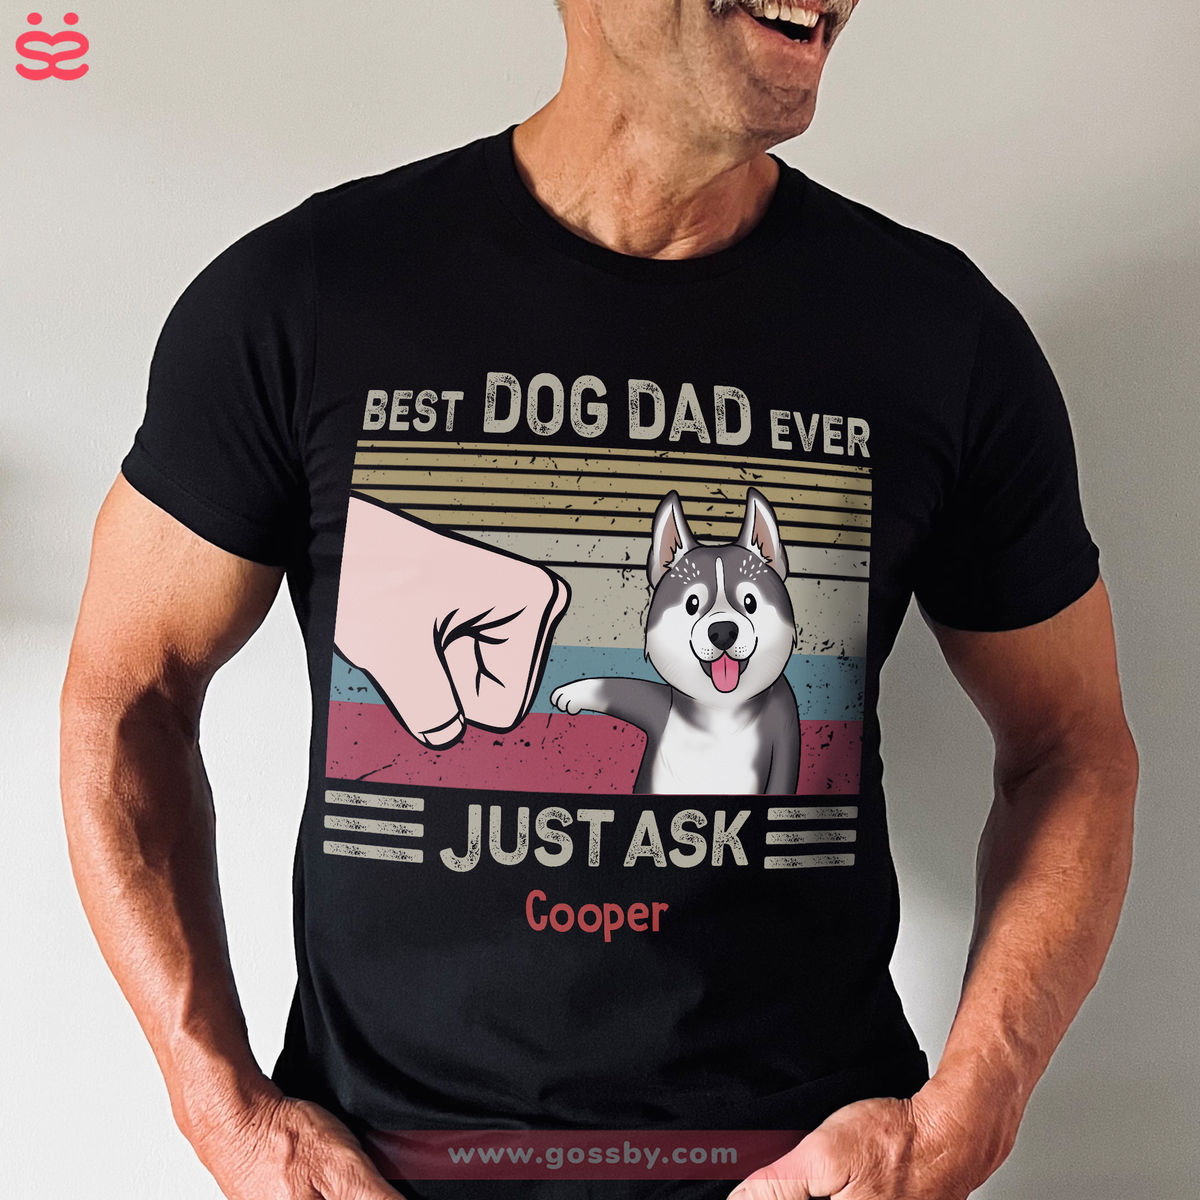 Personalized Shirt - Dog Dad T-shirt - Best Dog Dad Ever Just Ask - Father's Day Gift, Birthday Gifts, Gifts For Dad